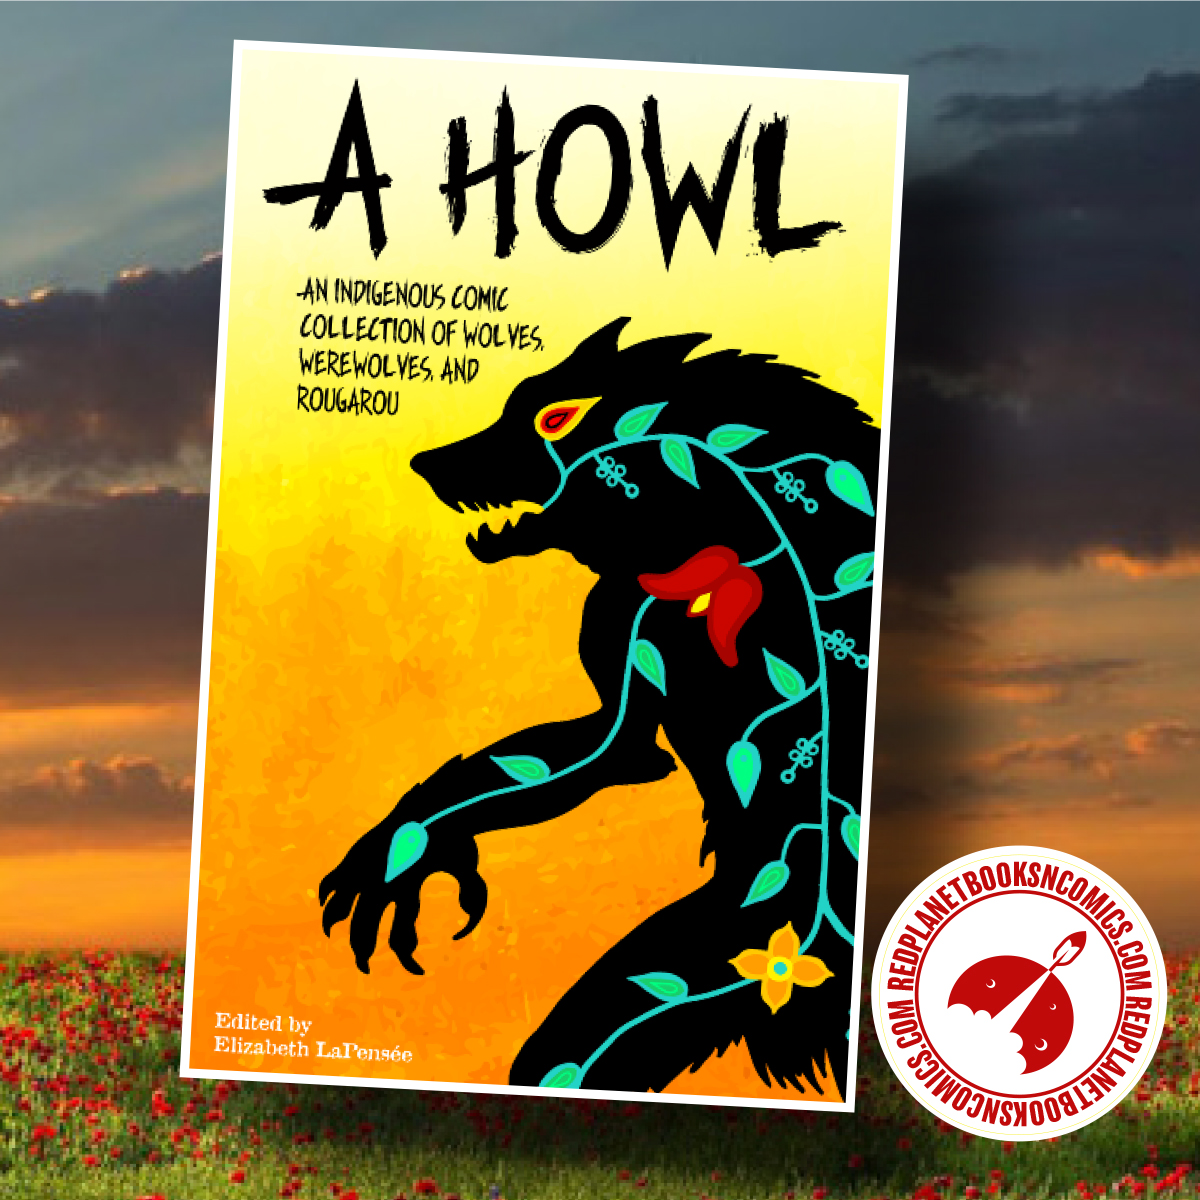 Tis the season… FOR WEREWOLVES! Get “A Howl: An Indigenous Anthology of Wolves, Werewolves, and Rougarou,” the graphic novel and add a Howl T-shirts, plush werewolves or other stuff.🔗 redplanetbooksncomics.com/blogs/news/get…!

#AHowl #Werewolves #Roguerou #NativeRealities #NativeCreatives